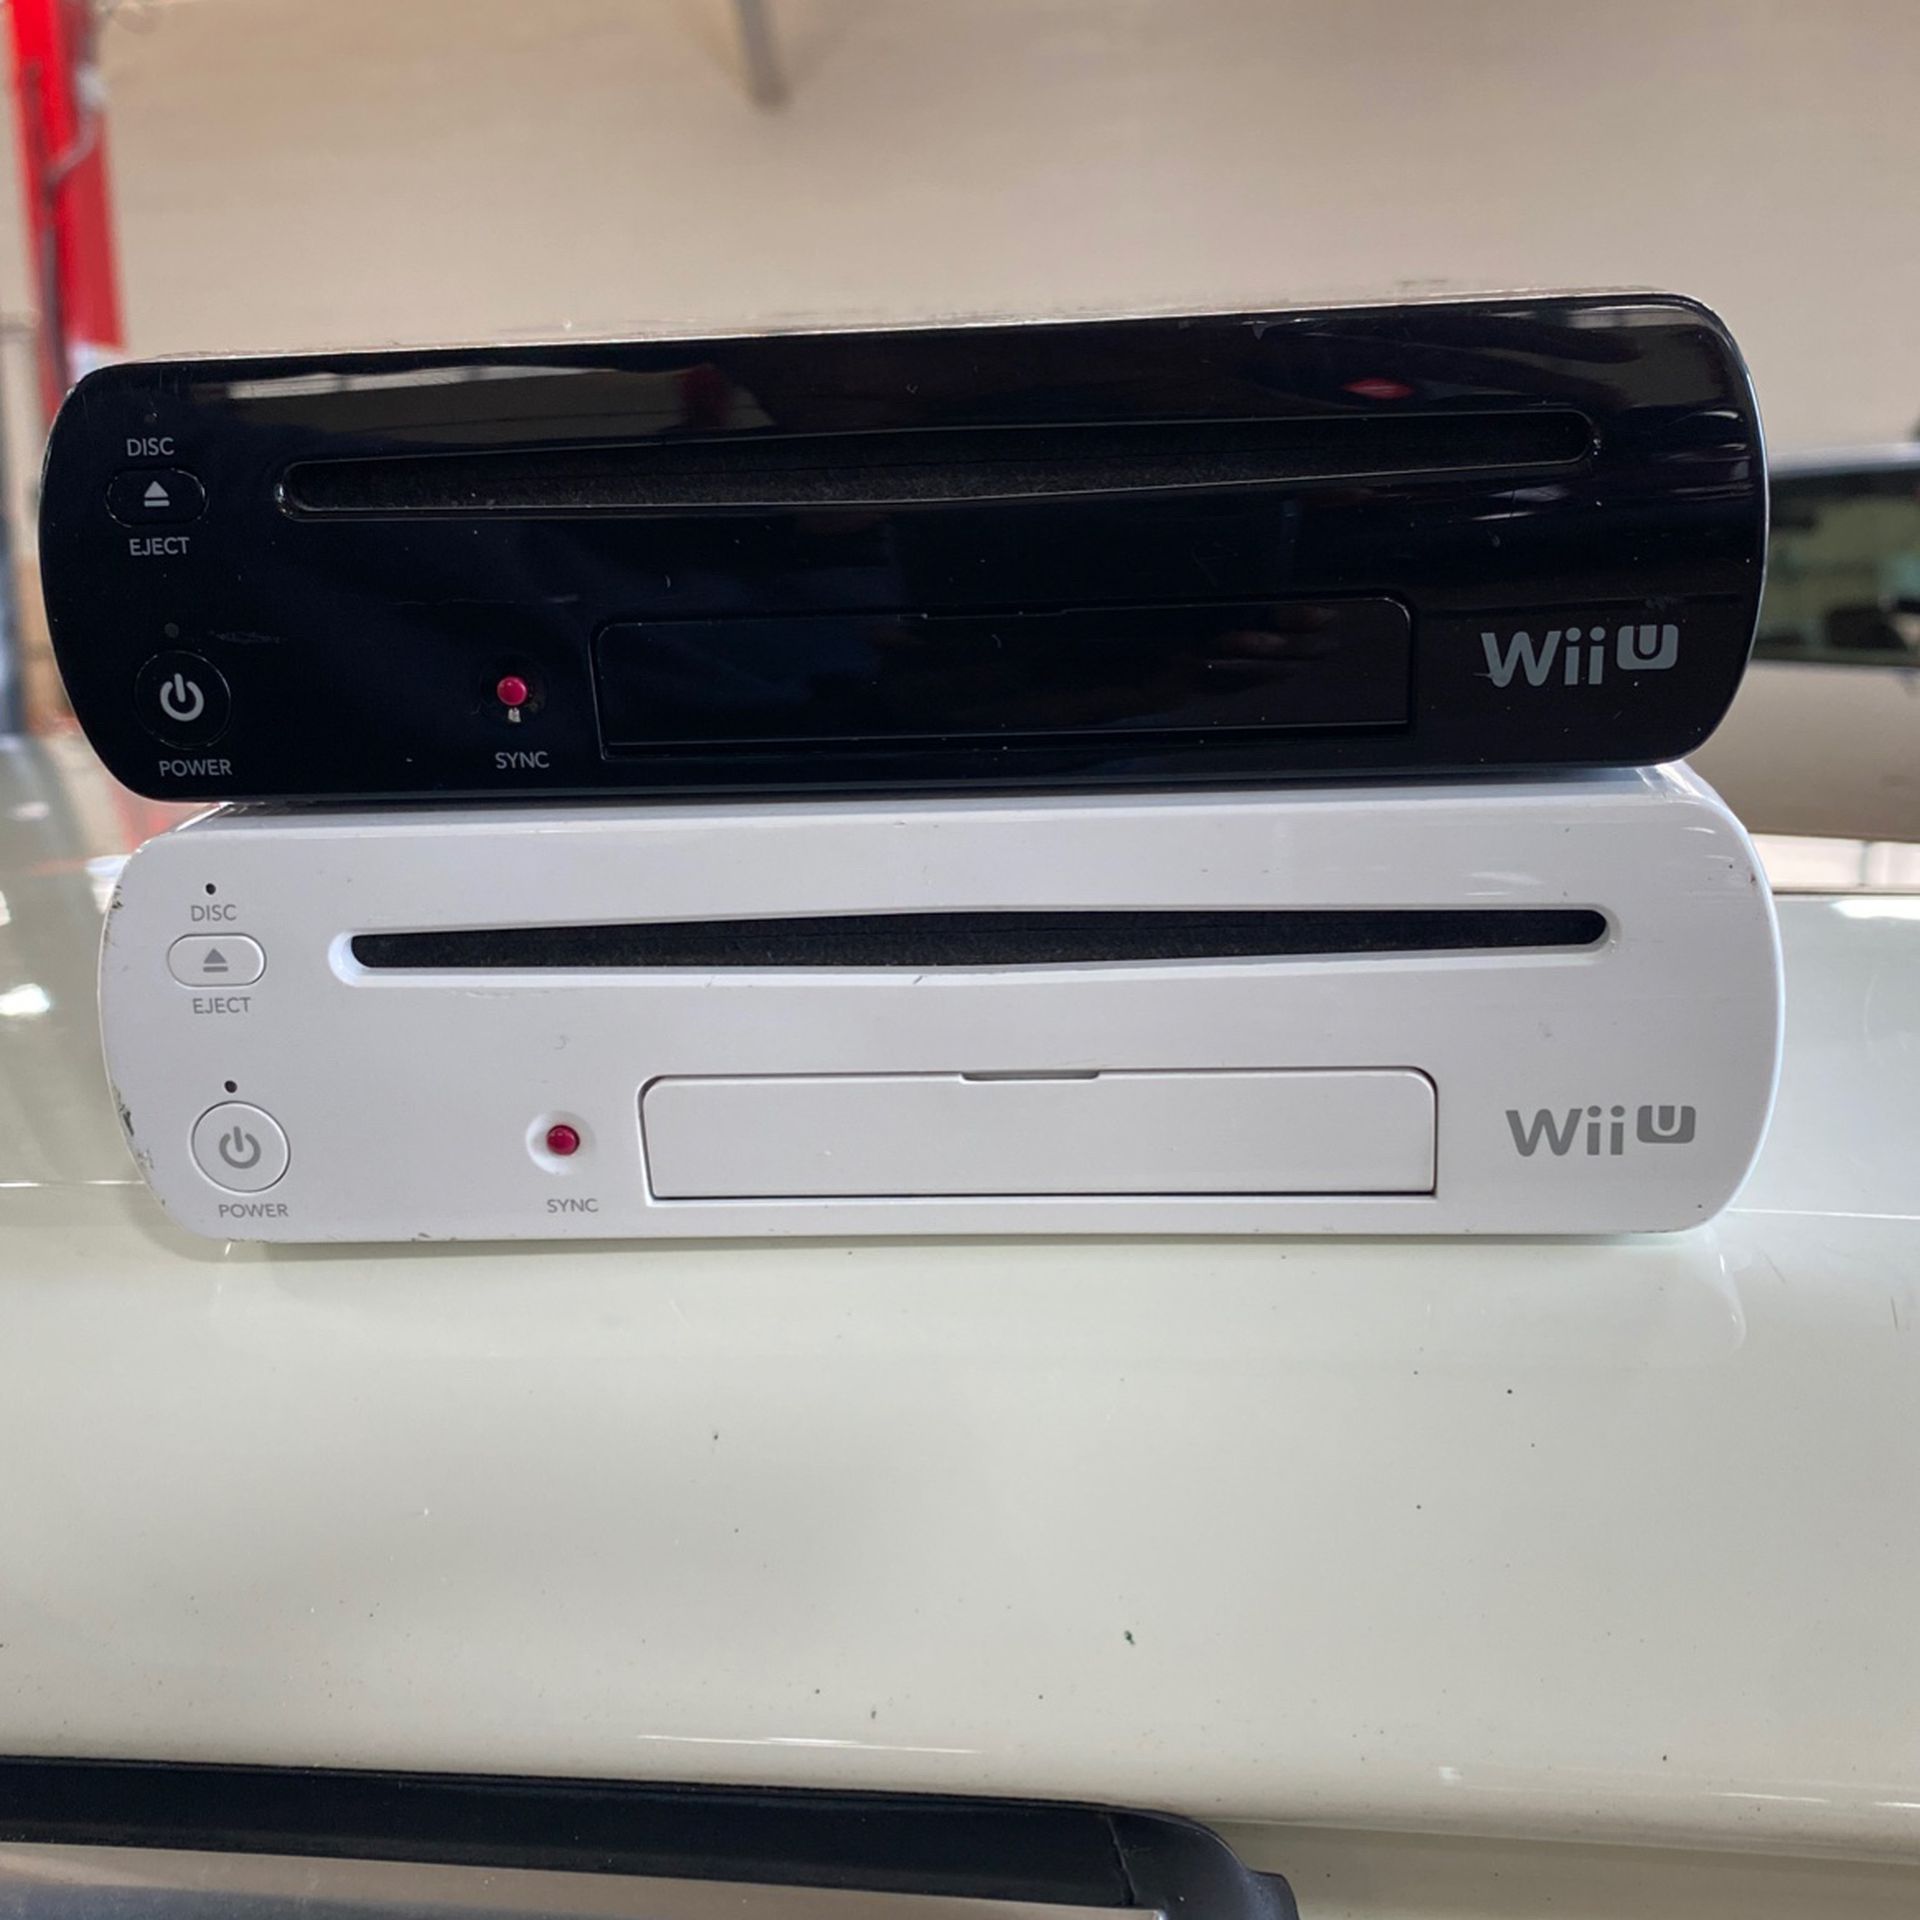 Nintendo Wii 32 GB black Nintendo Wii 8 GB white multiple colors multiple wires No Remotes all systems fully functional 100% Asking 50$